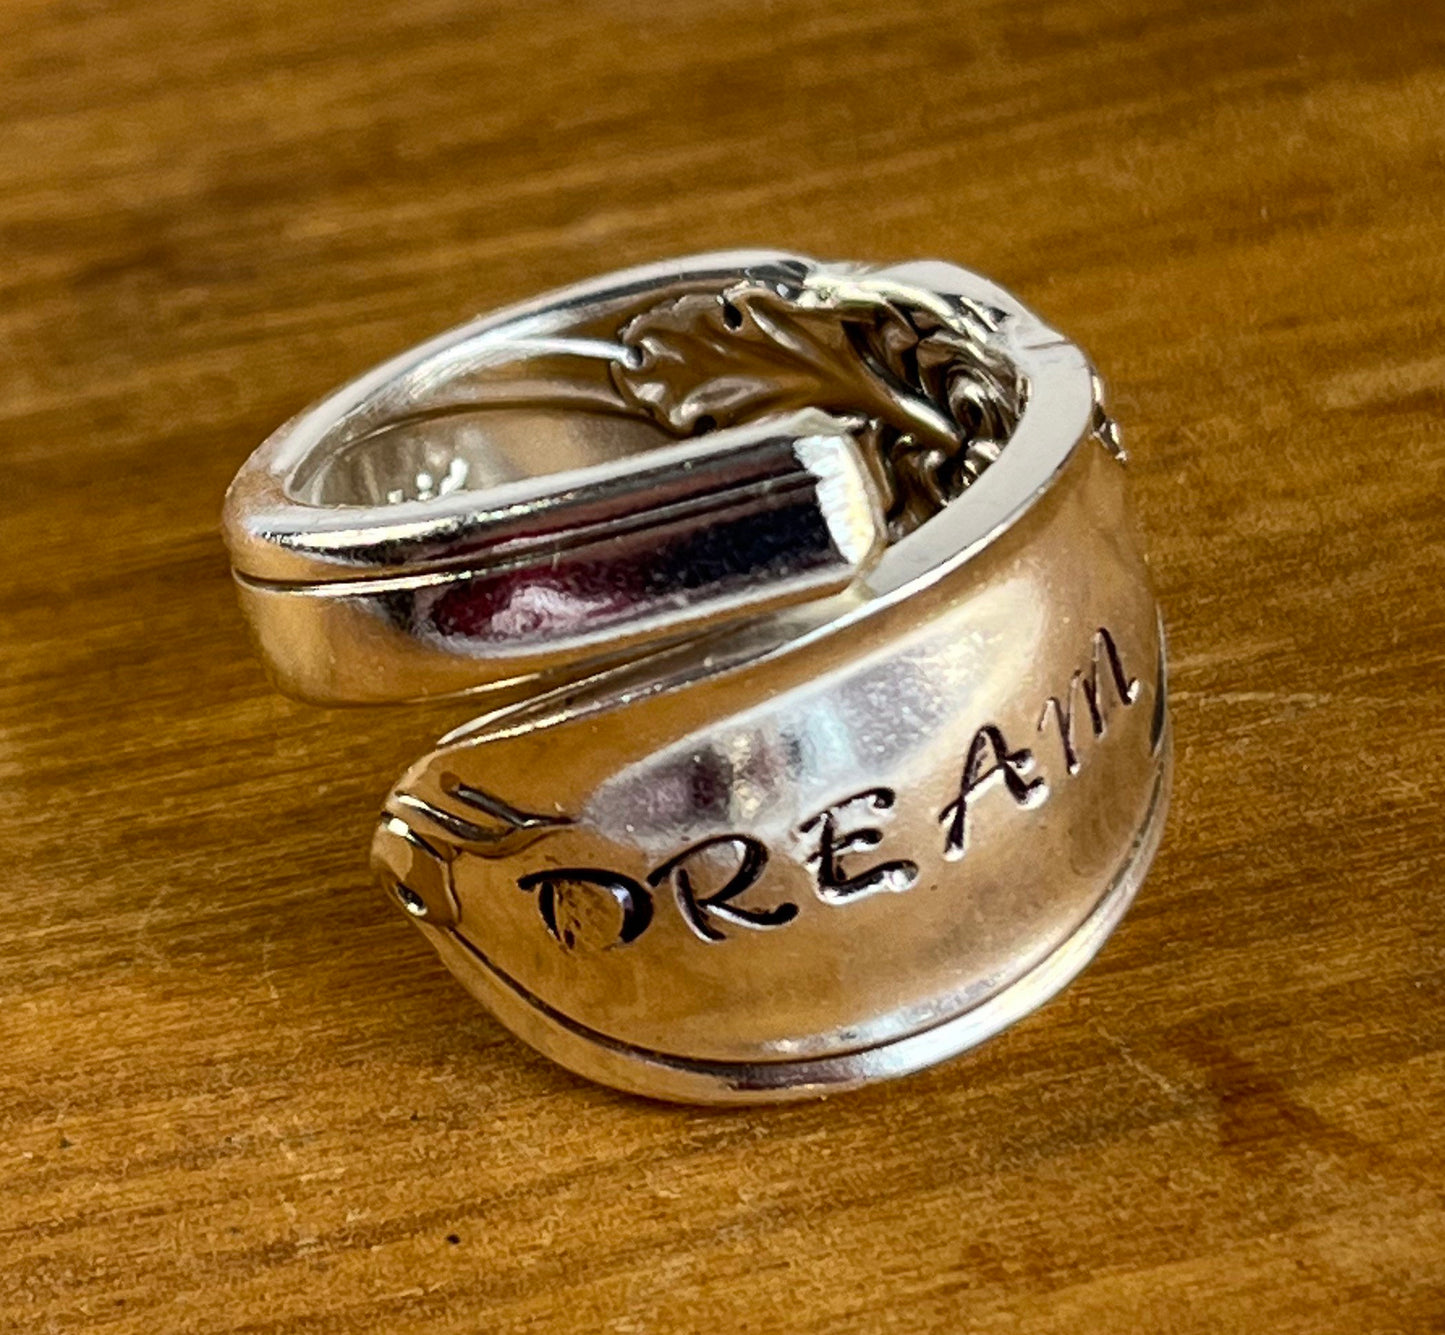 Silver Wrap Ring made from Vintage Spoon Handle with “Dream” hand stamped, Silverware Jewelry, Silver Spoon Ring for her,